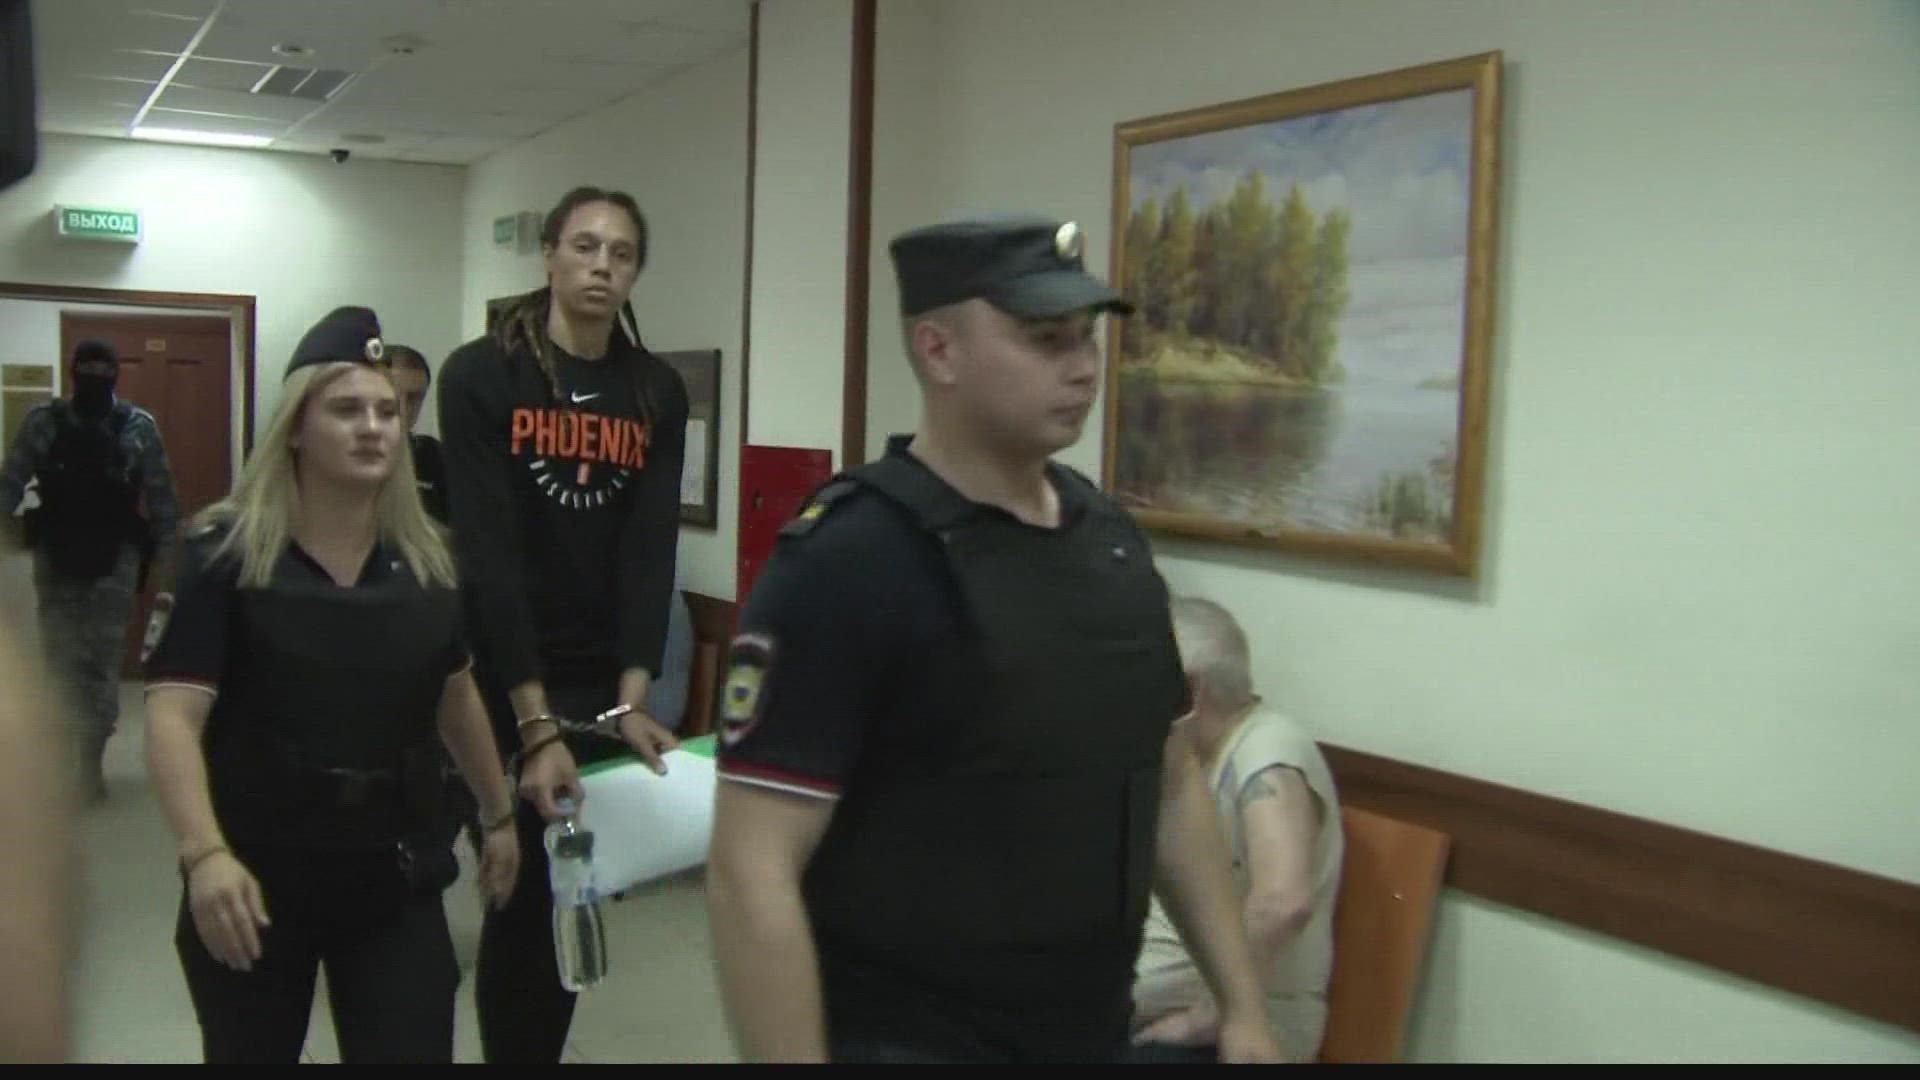 This is video of Griner entering court again today in Russia.